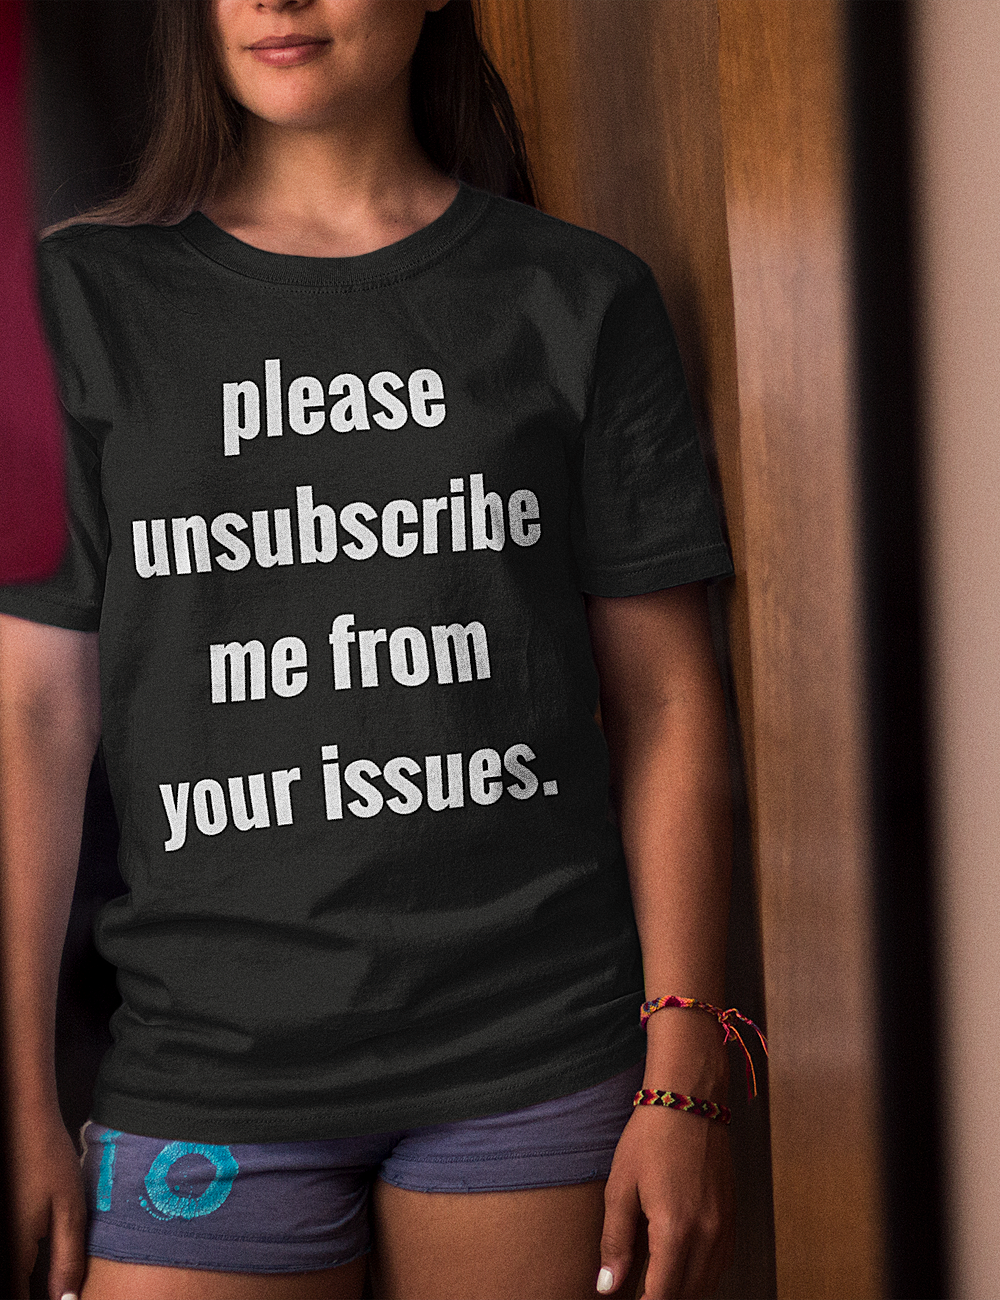 Please Unsubscribe Me From Your Issues Men's Classic T-Shirt OniTakai